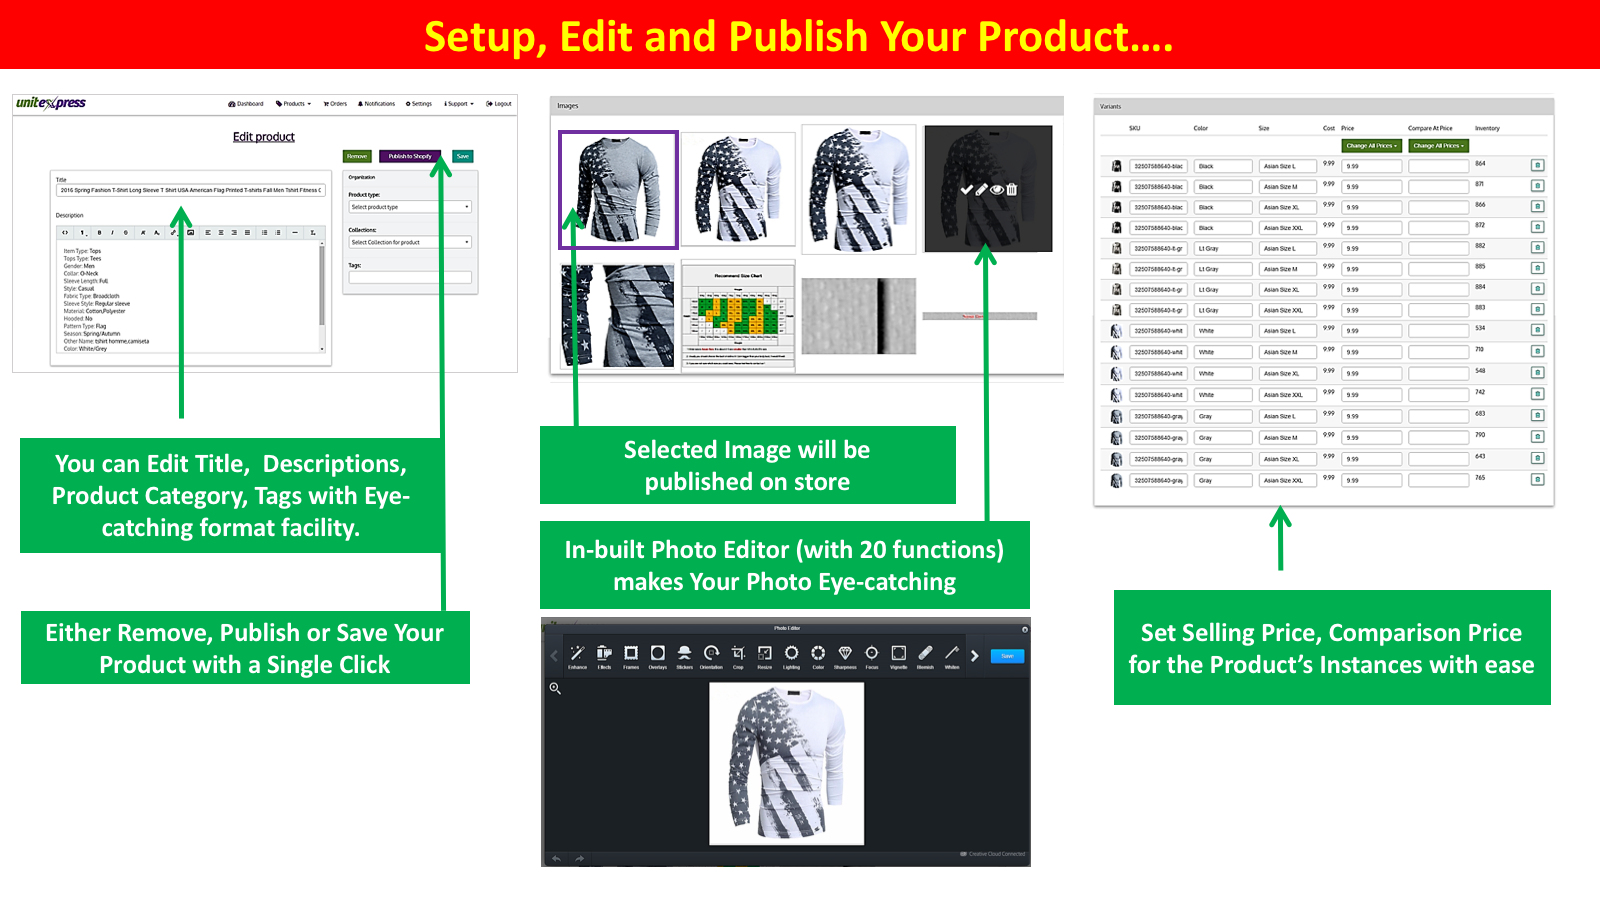 Setup & Edit Your Products before Publish